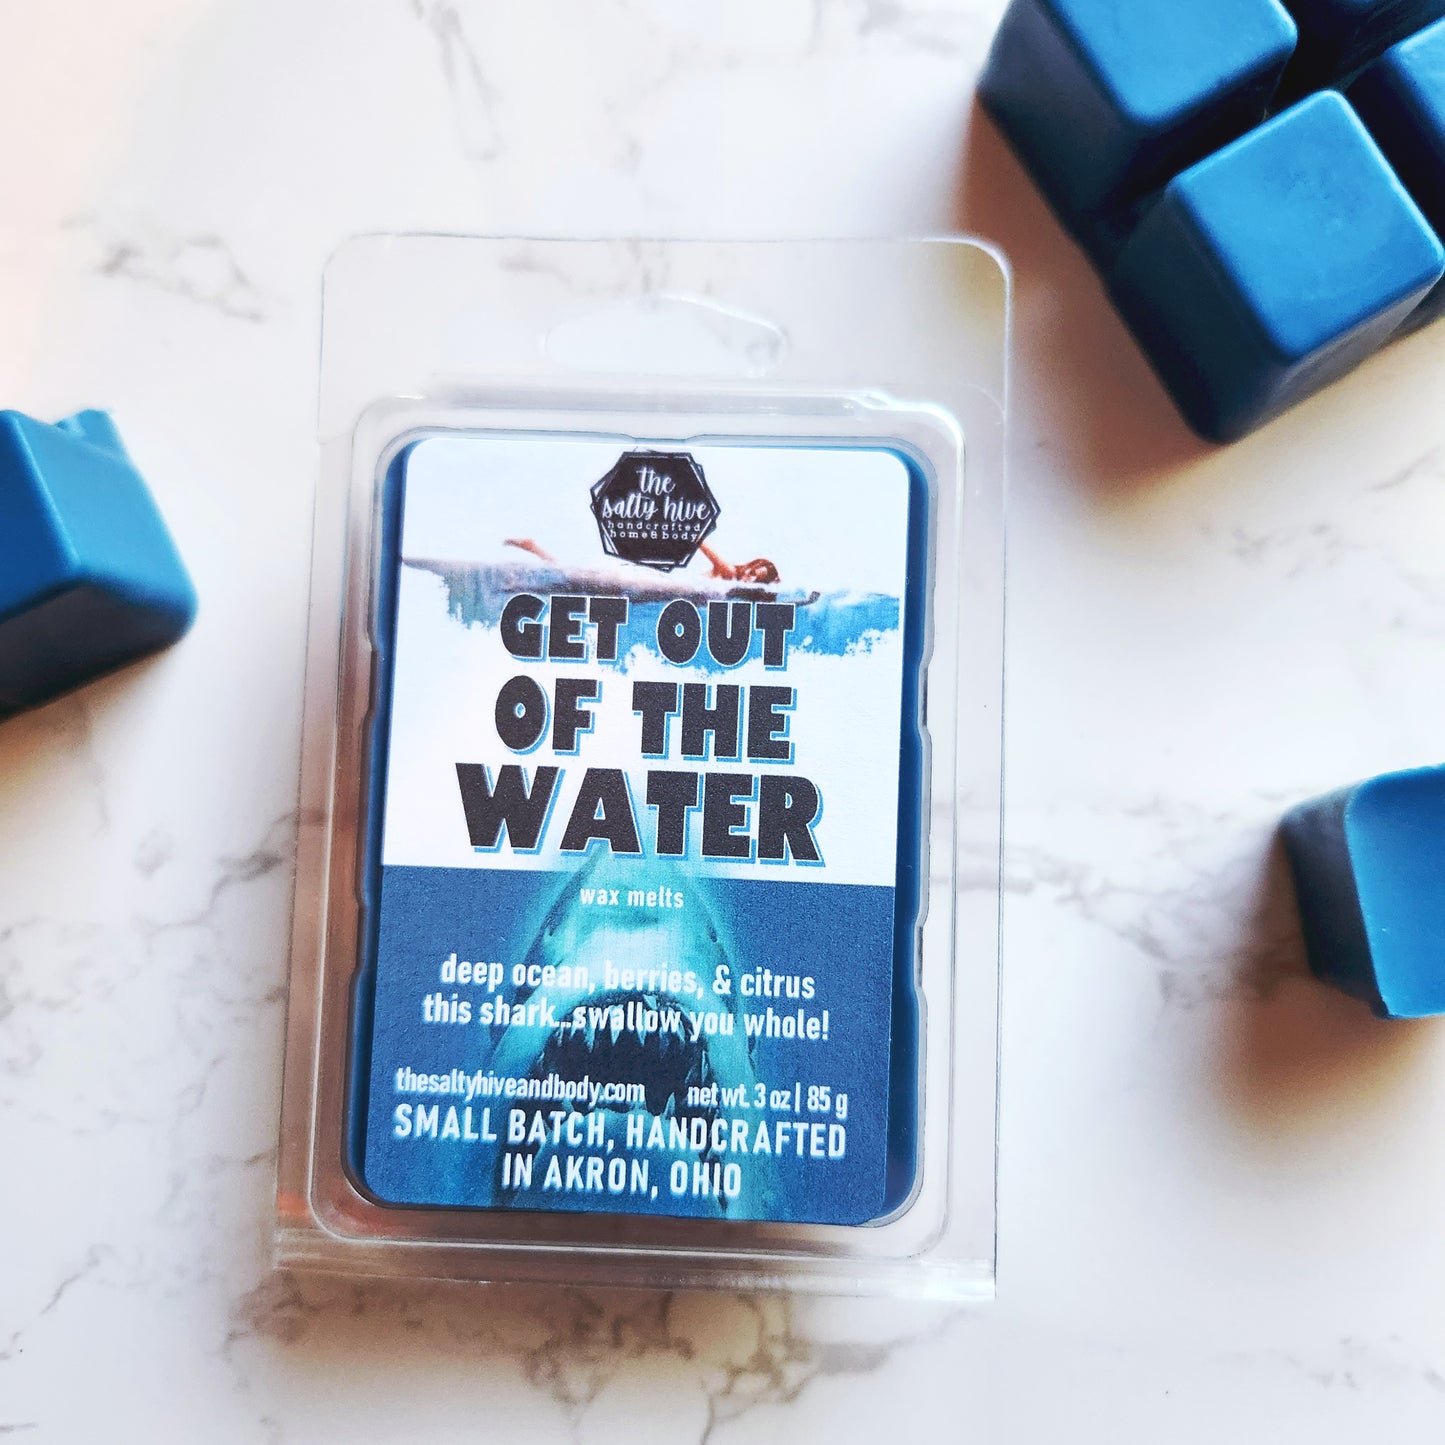 get out of the water! wax melts - the salty hive